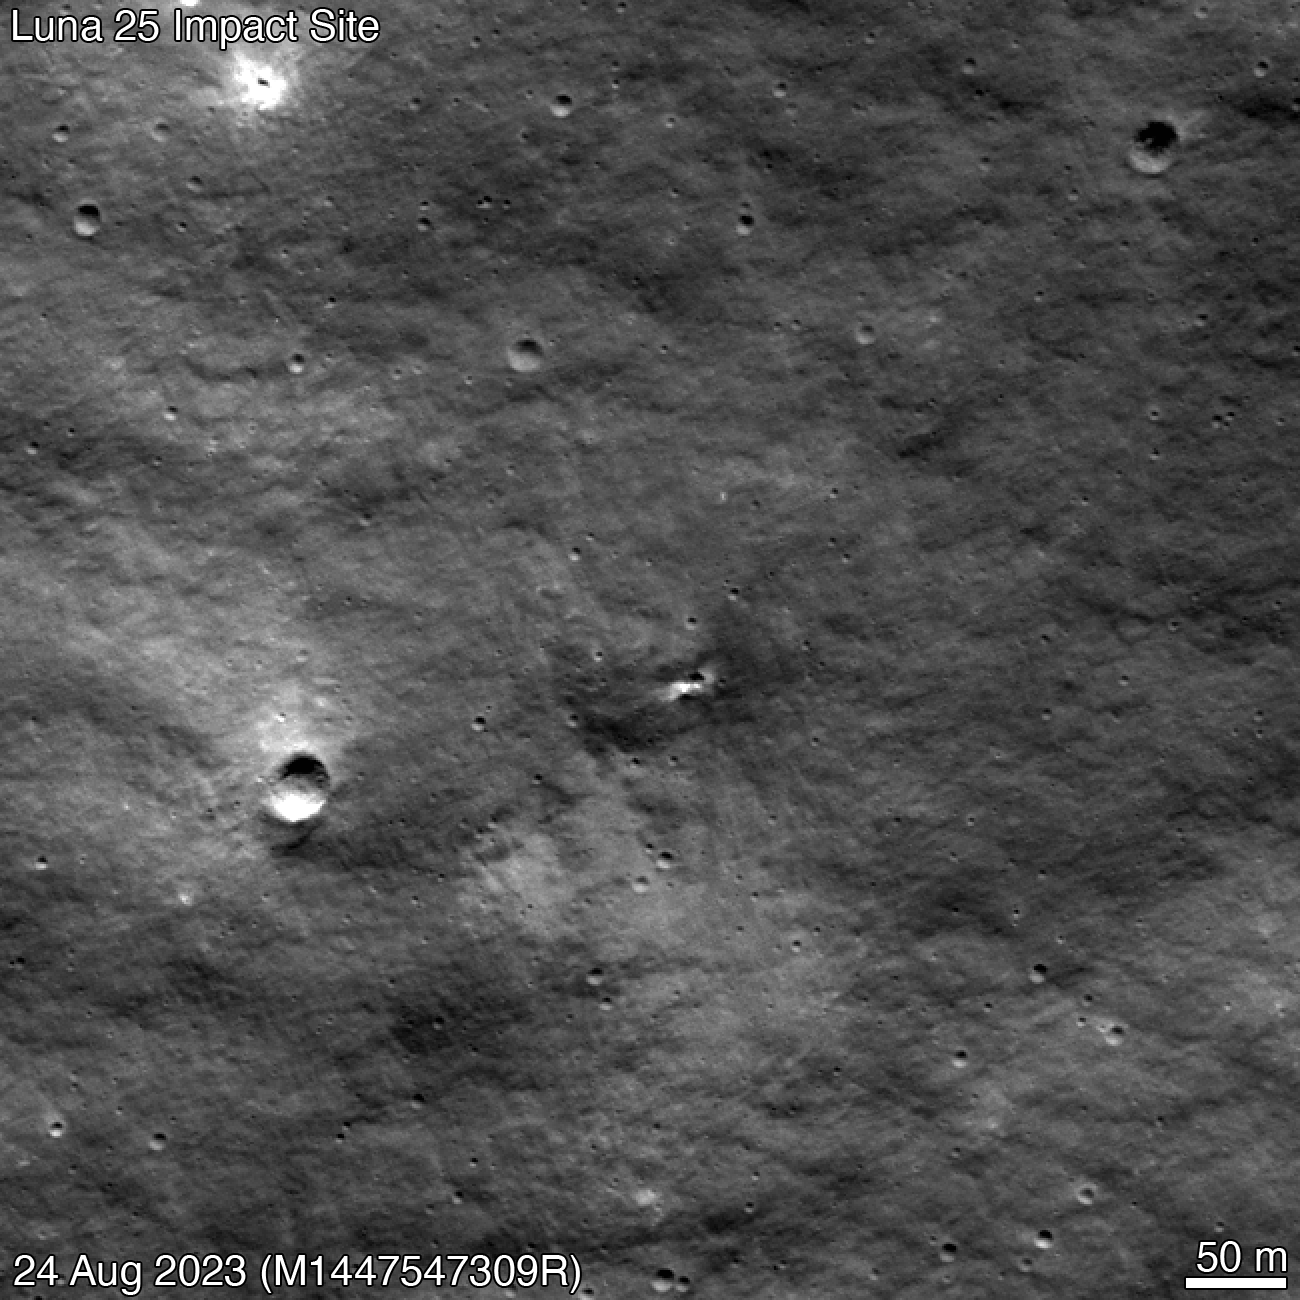 before-and-after shots of the moon's surface, showing a small fresh crater